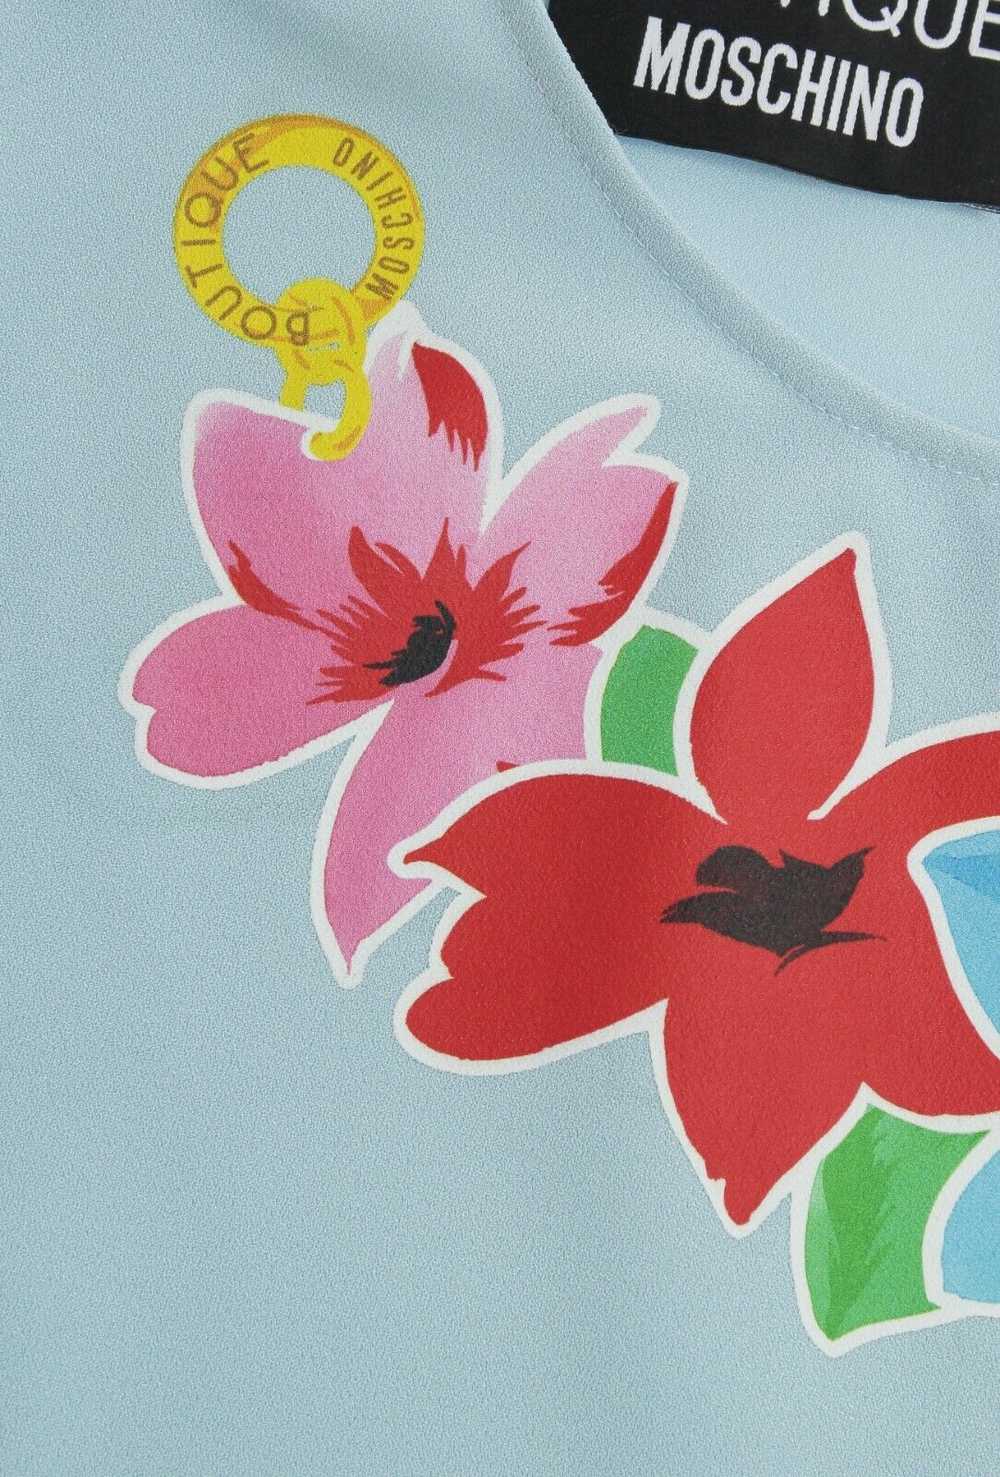 Moschino Boutique 2010s Floral Printed Summer Blo… - image 2